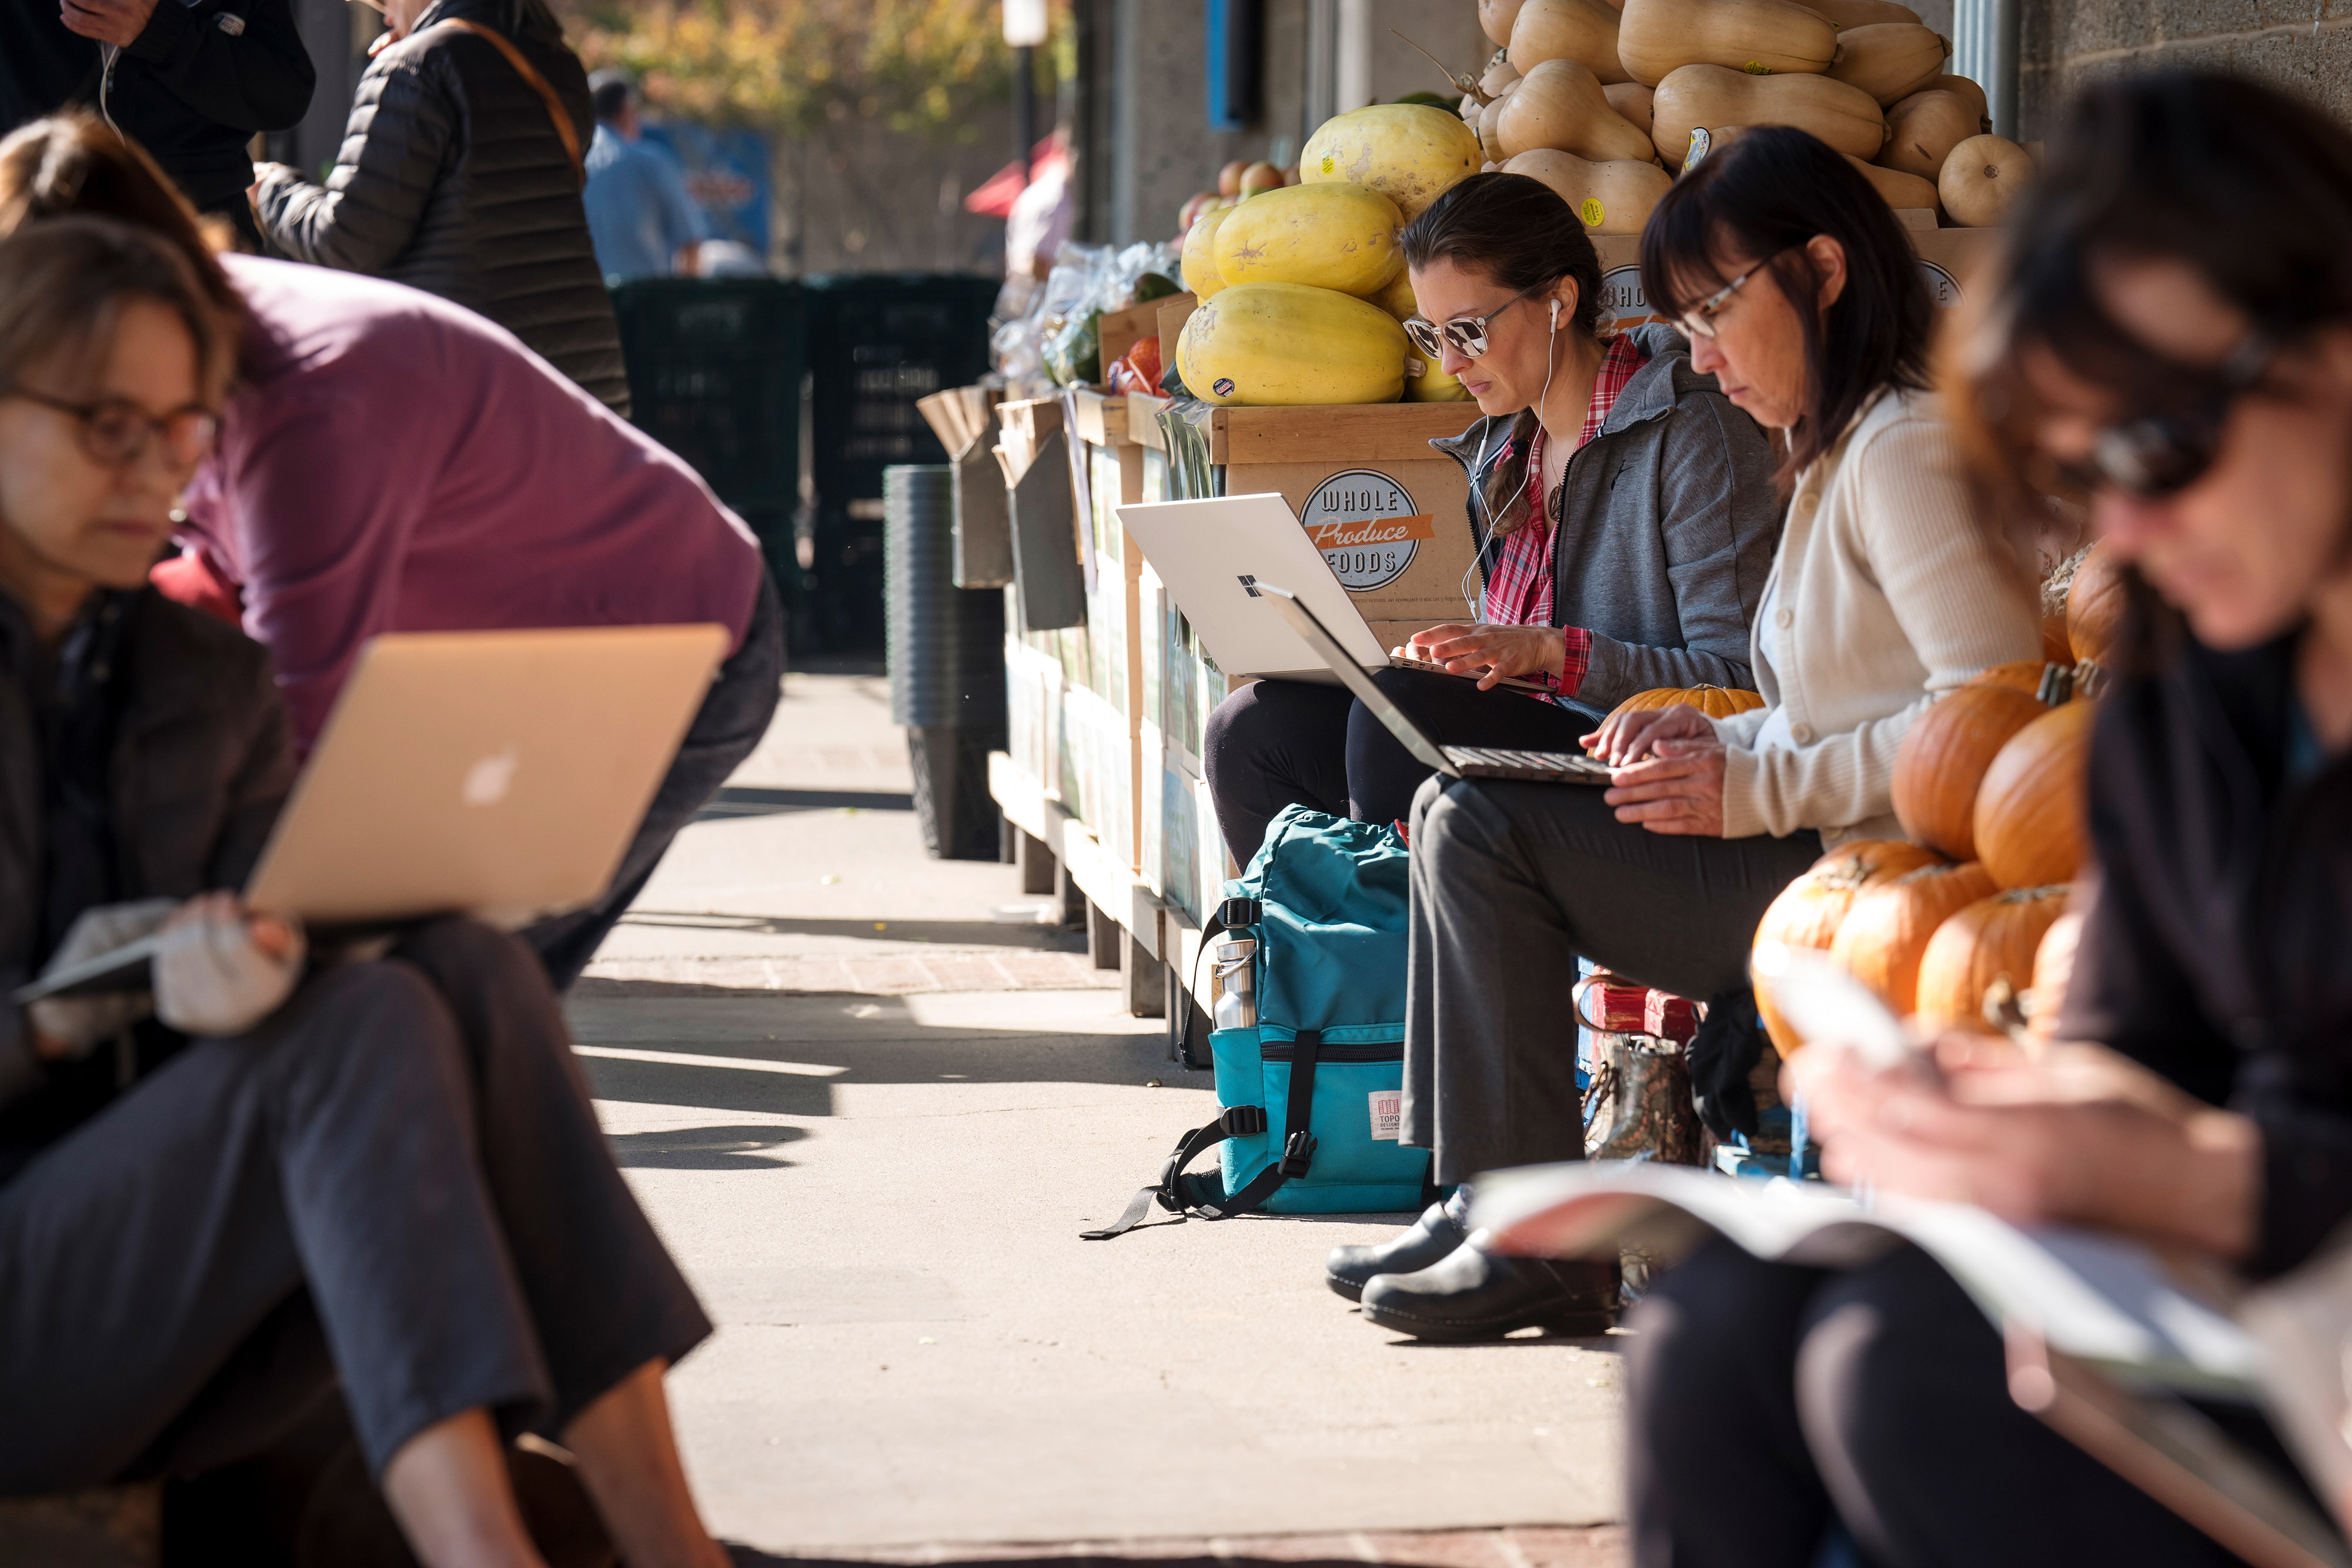 People charge electronic devices and use wifi in front of a Whole Foods in Mill Valley on, Oct. 29.